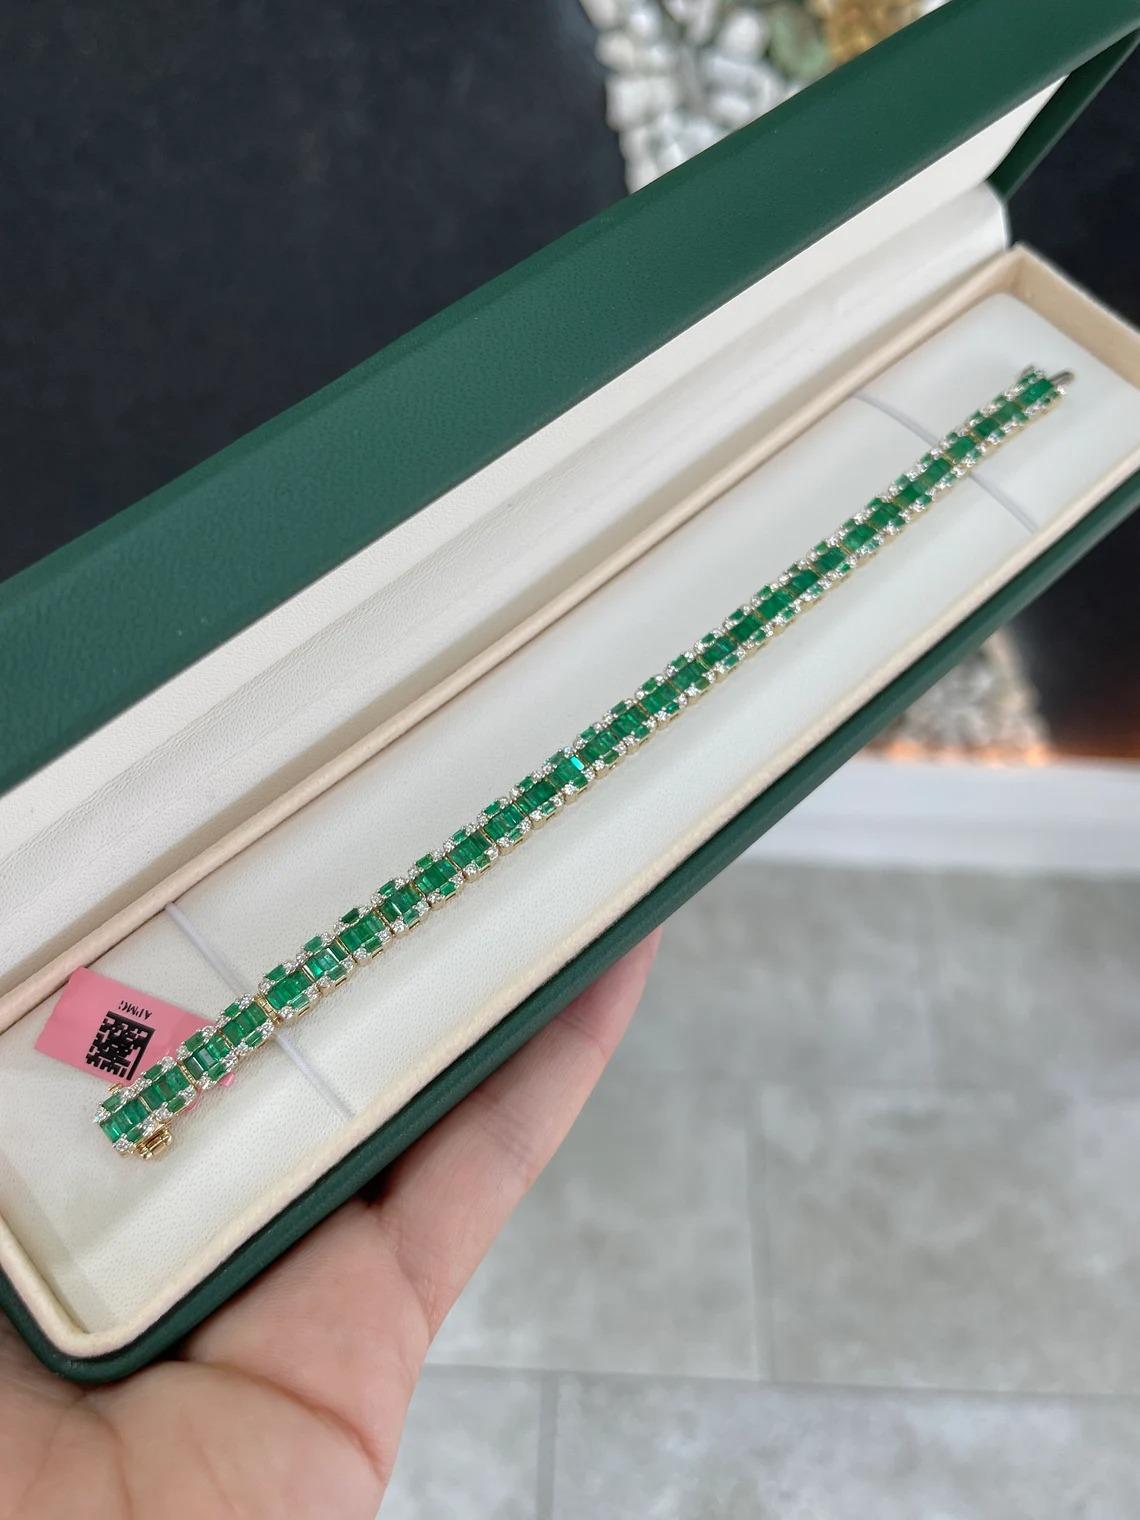 A timeless treasure that is as alluring as it appears. This extravagant piece of jewelry showcases a remarkable natural emerald and diamond bracelet. Featuring over seven carats of high-quality baguette cut emeralds that display a rich and vivacious